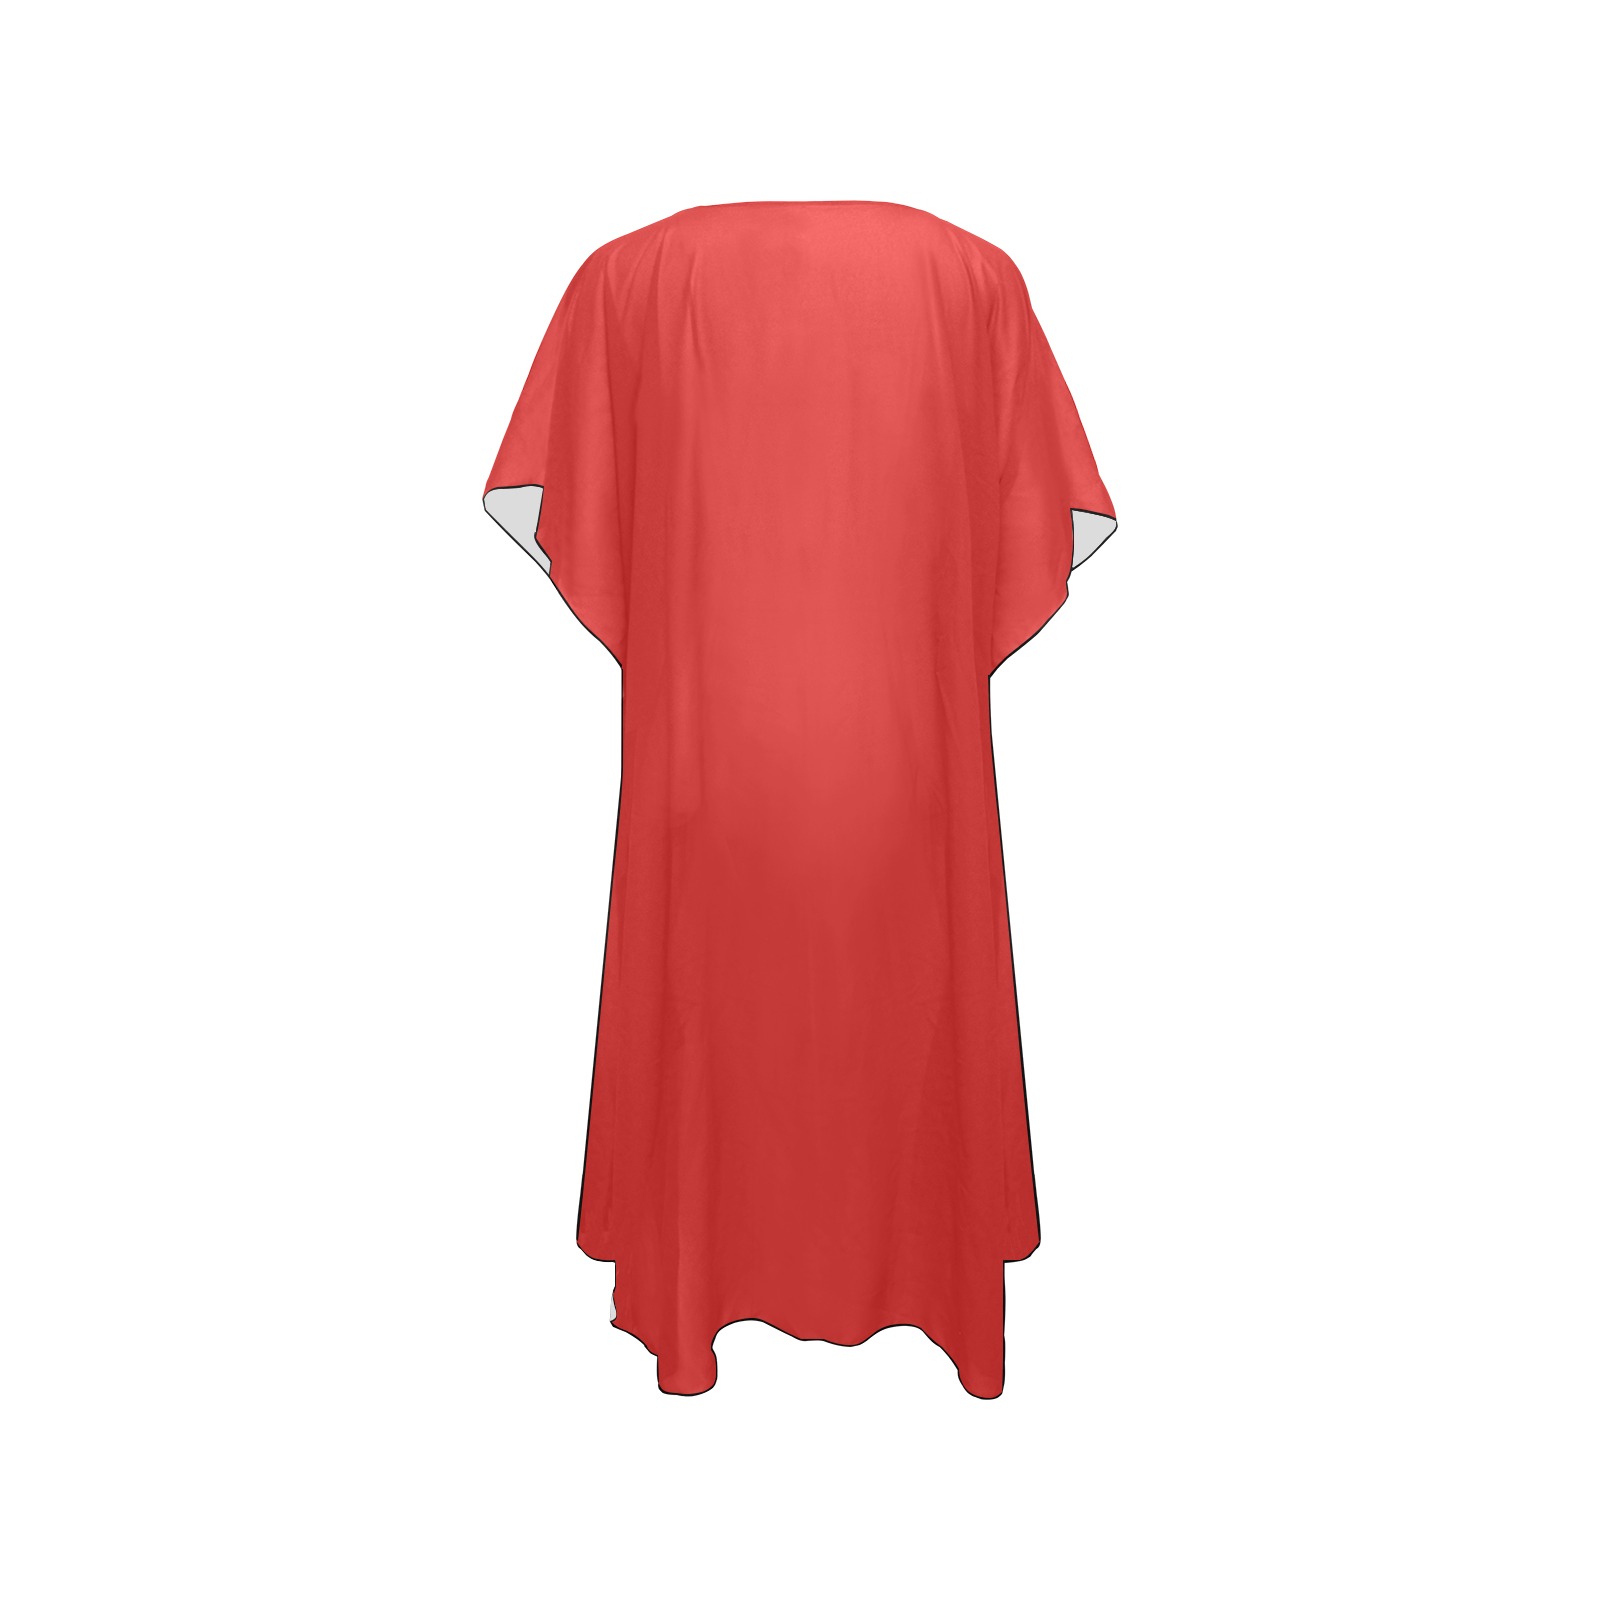 Solid Colors Red Mid-Length Side Slits Chiffon Cover Ups (Model H50)